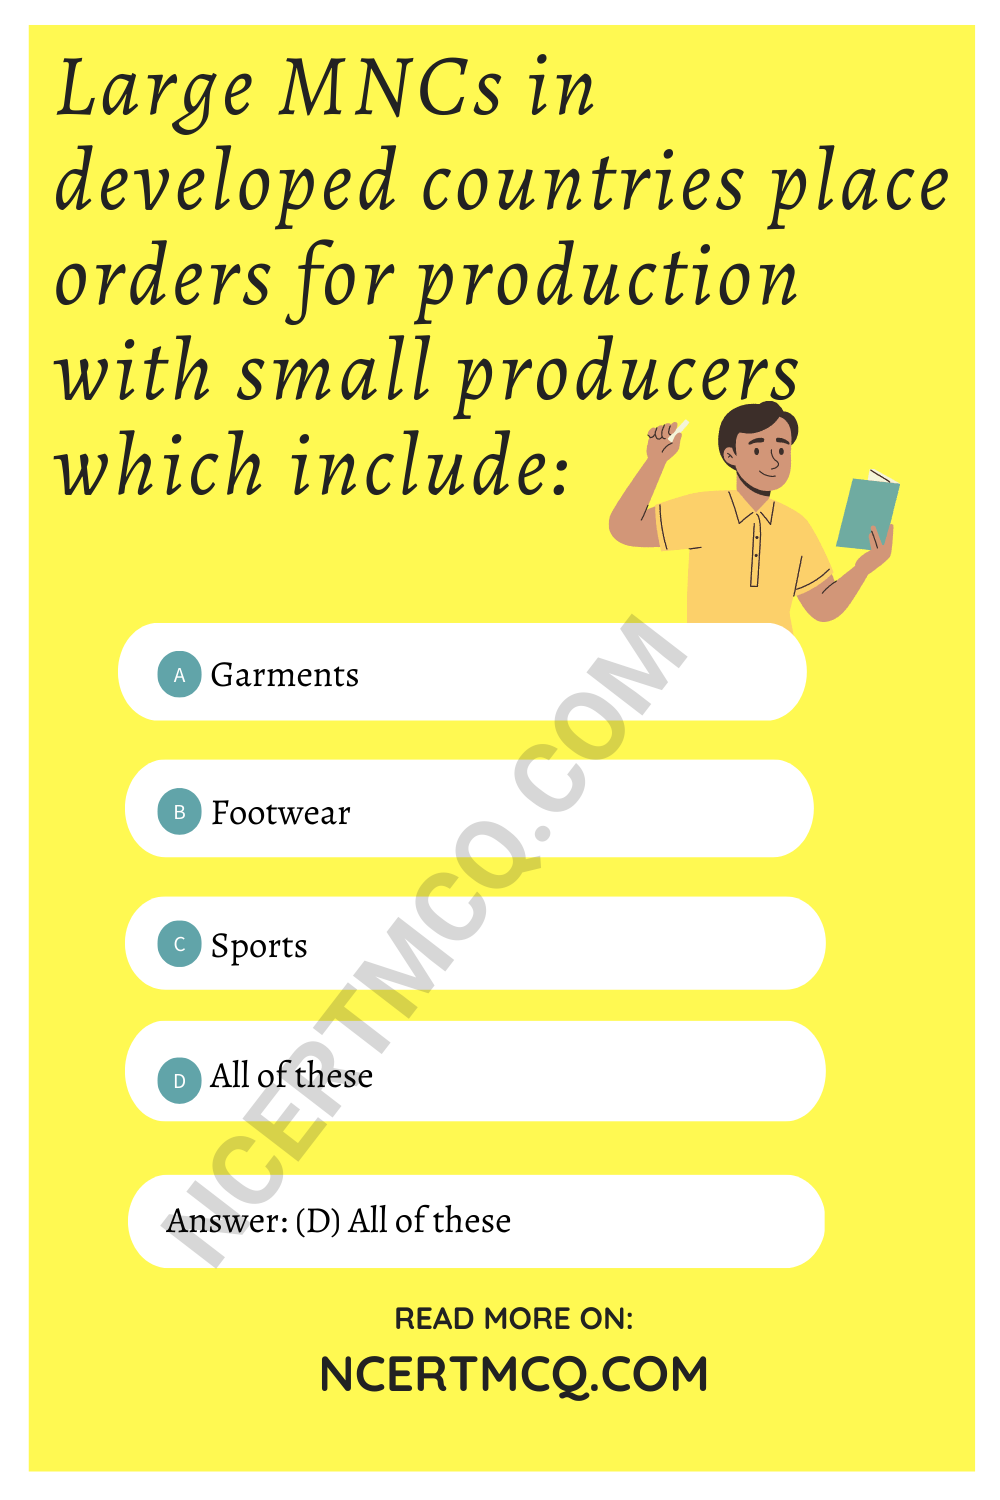 Large MNCs in developed countries place orders for production with small producers which include: